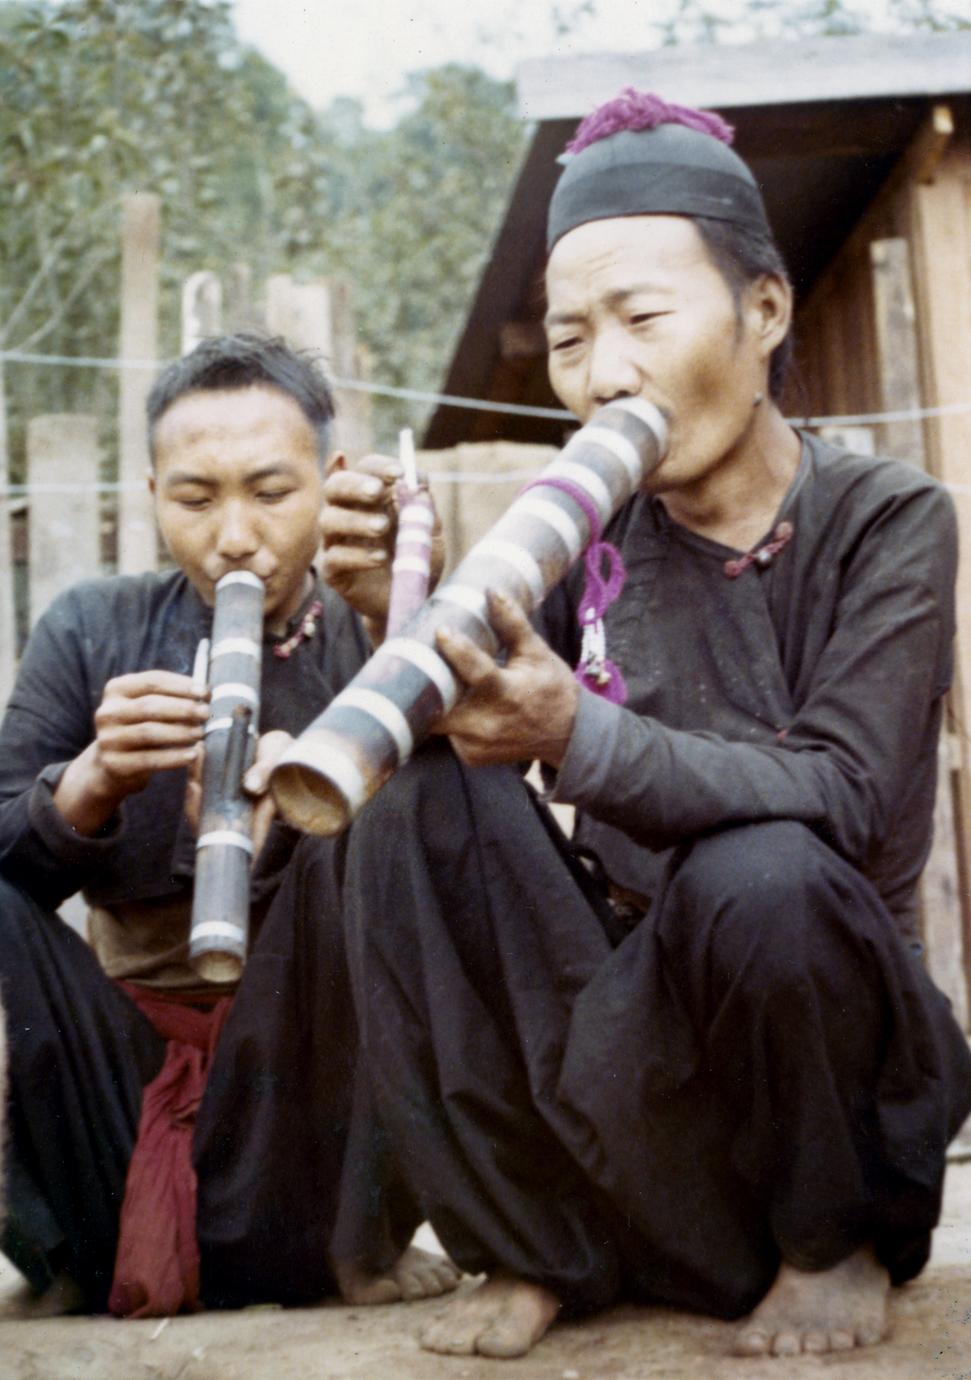 Two Blue Hmong (Hmong Njua) men smoking water pipes in northern Thailand